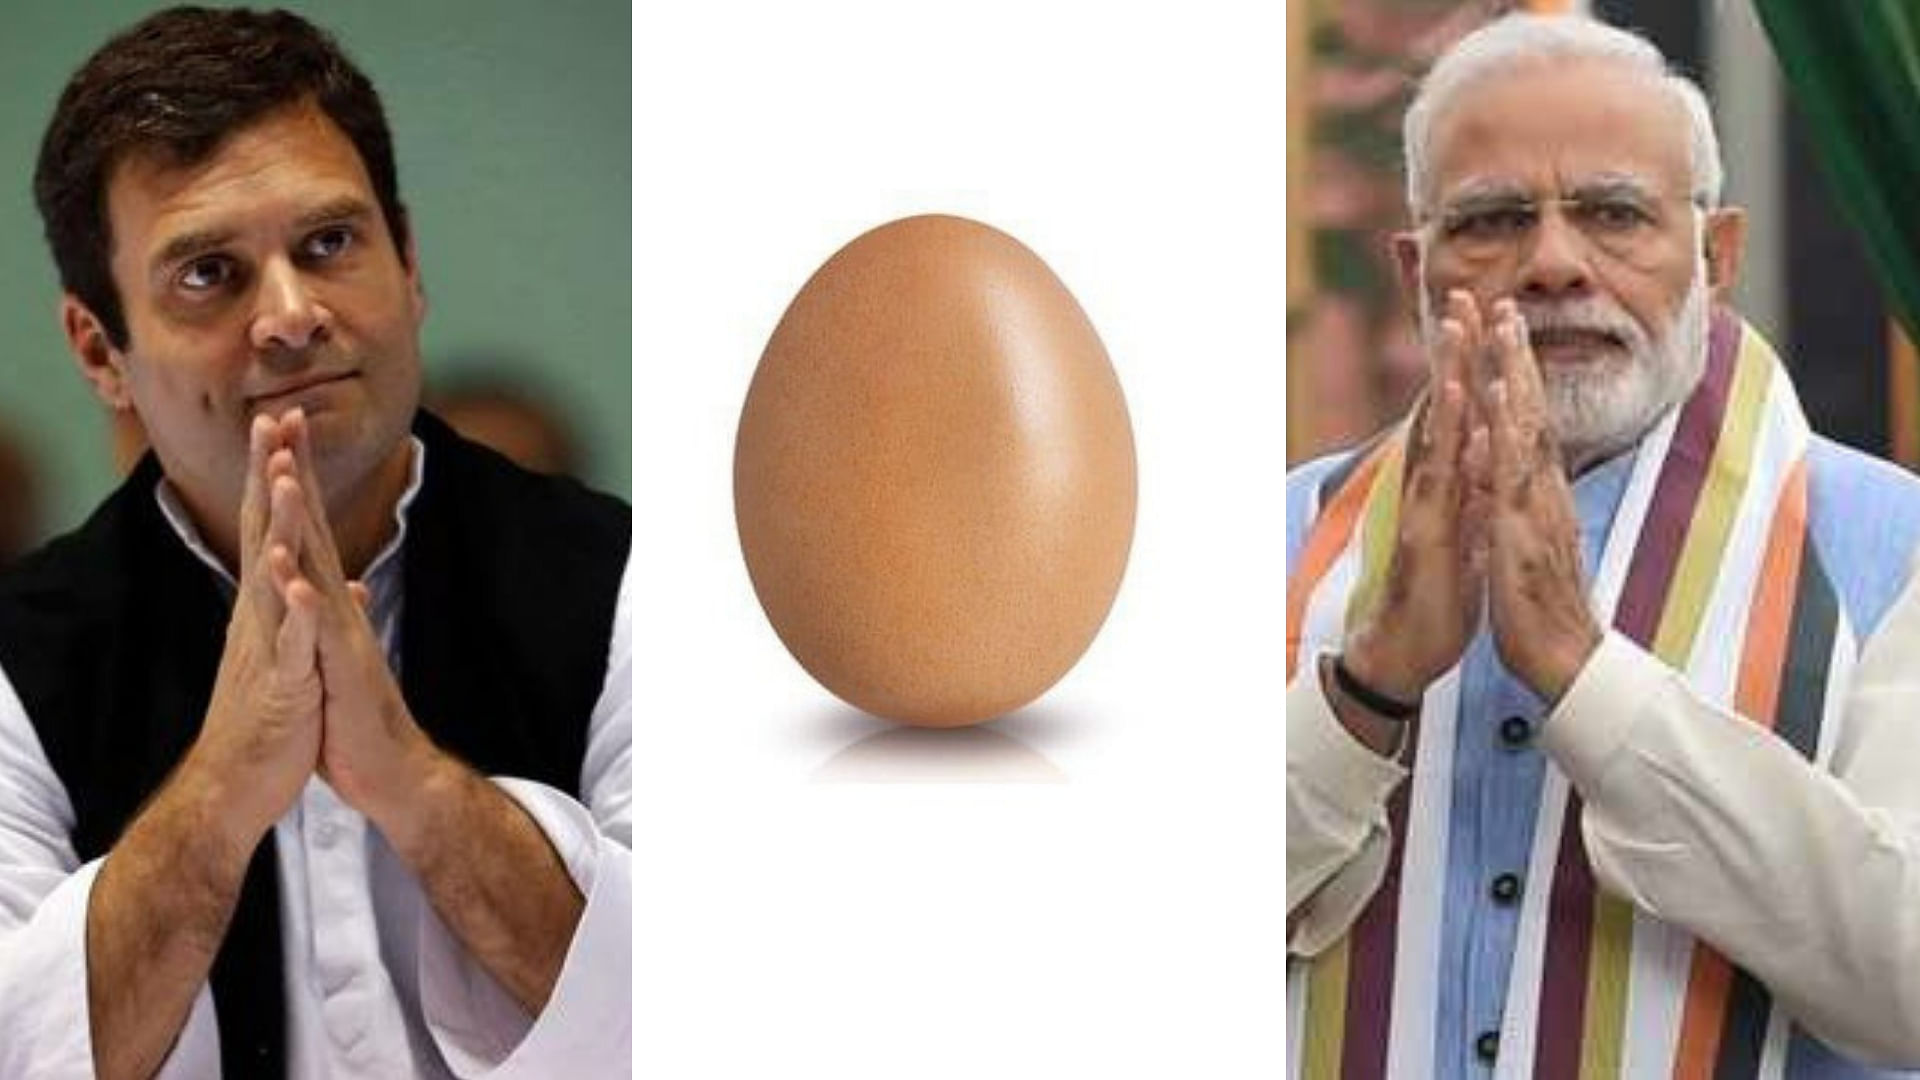 ‘Eggs’! That’s how the Congress summarised the Modi govt’s performance in the last 5 years.